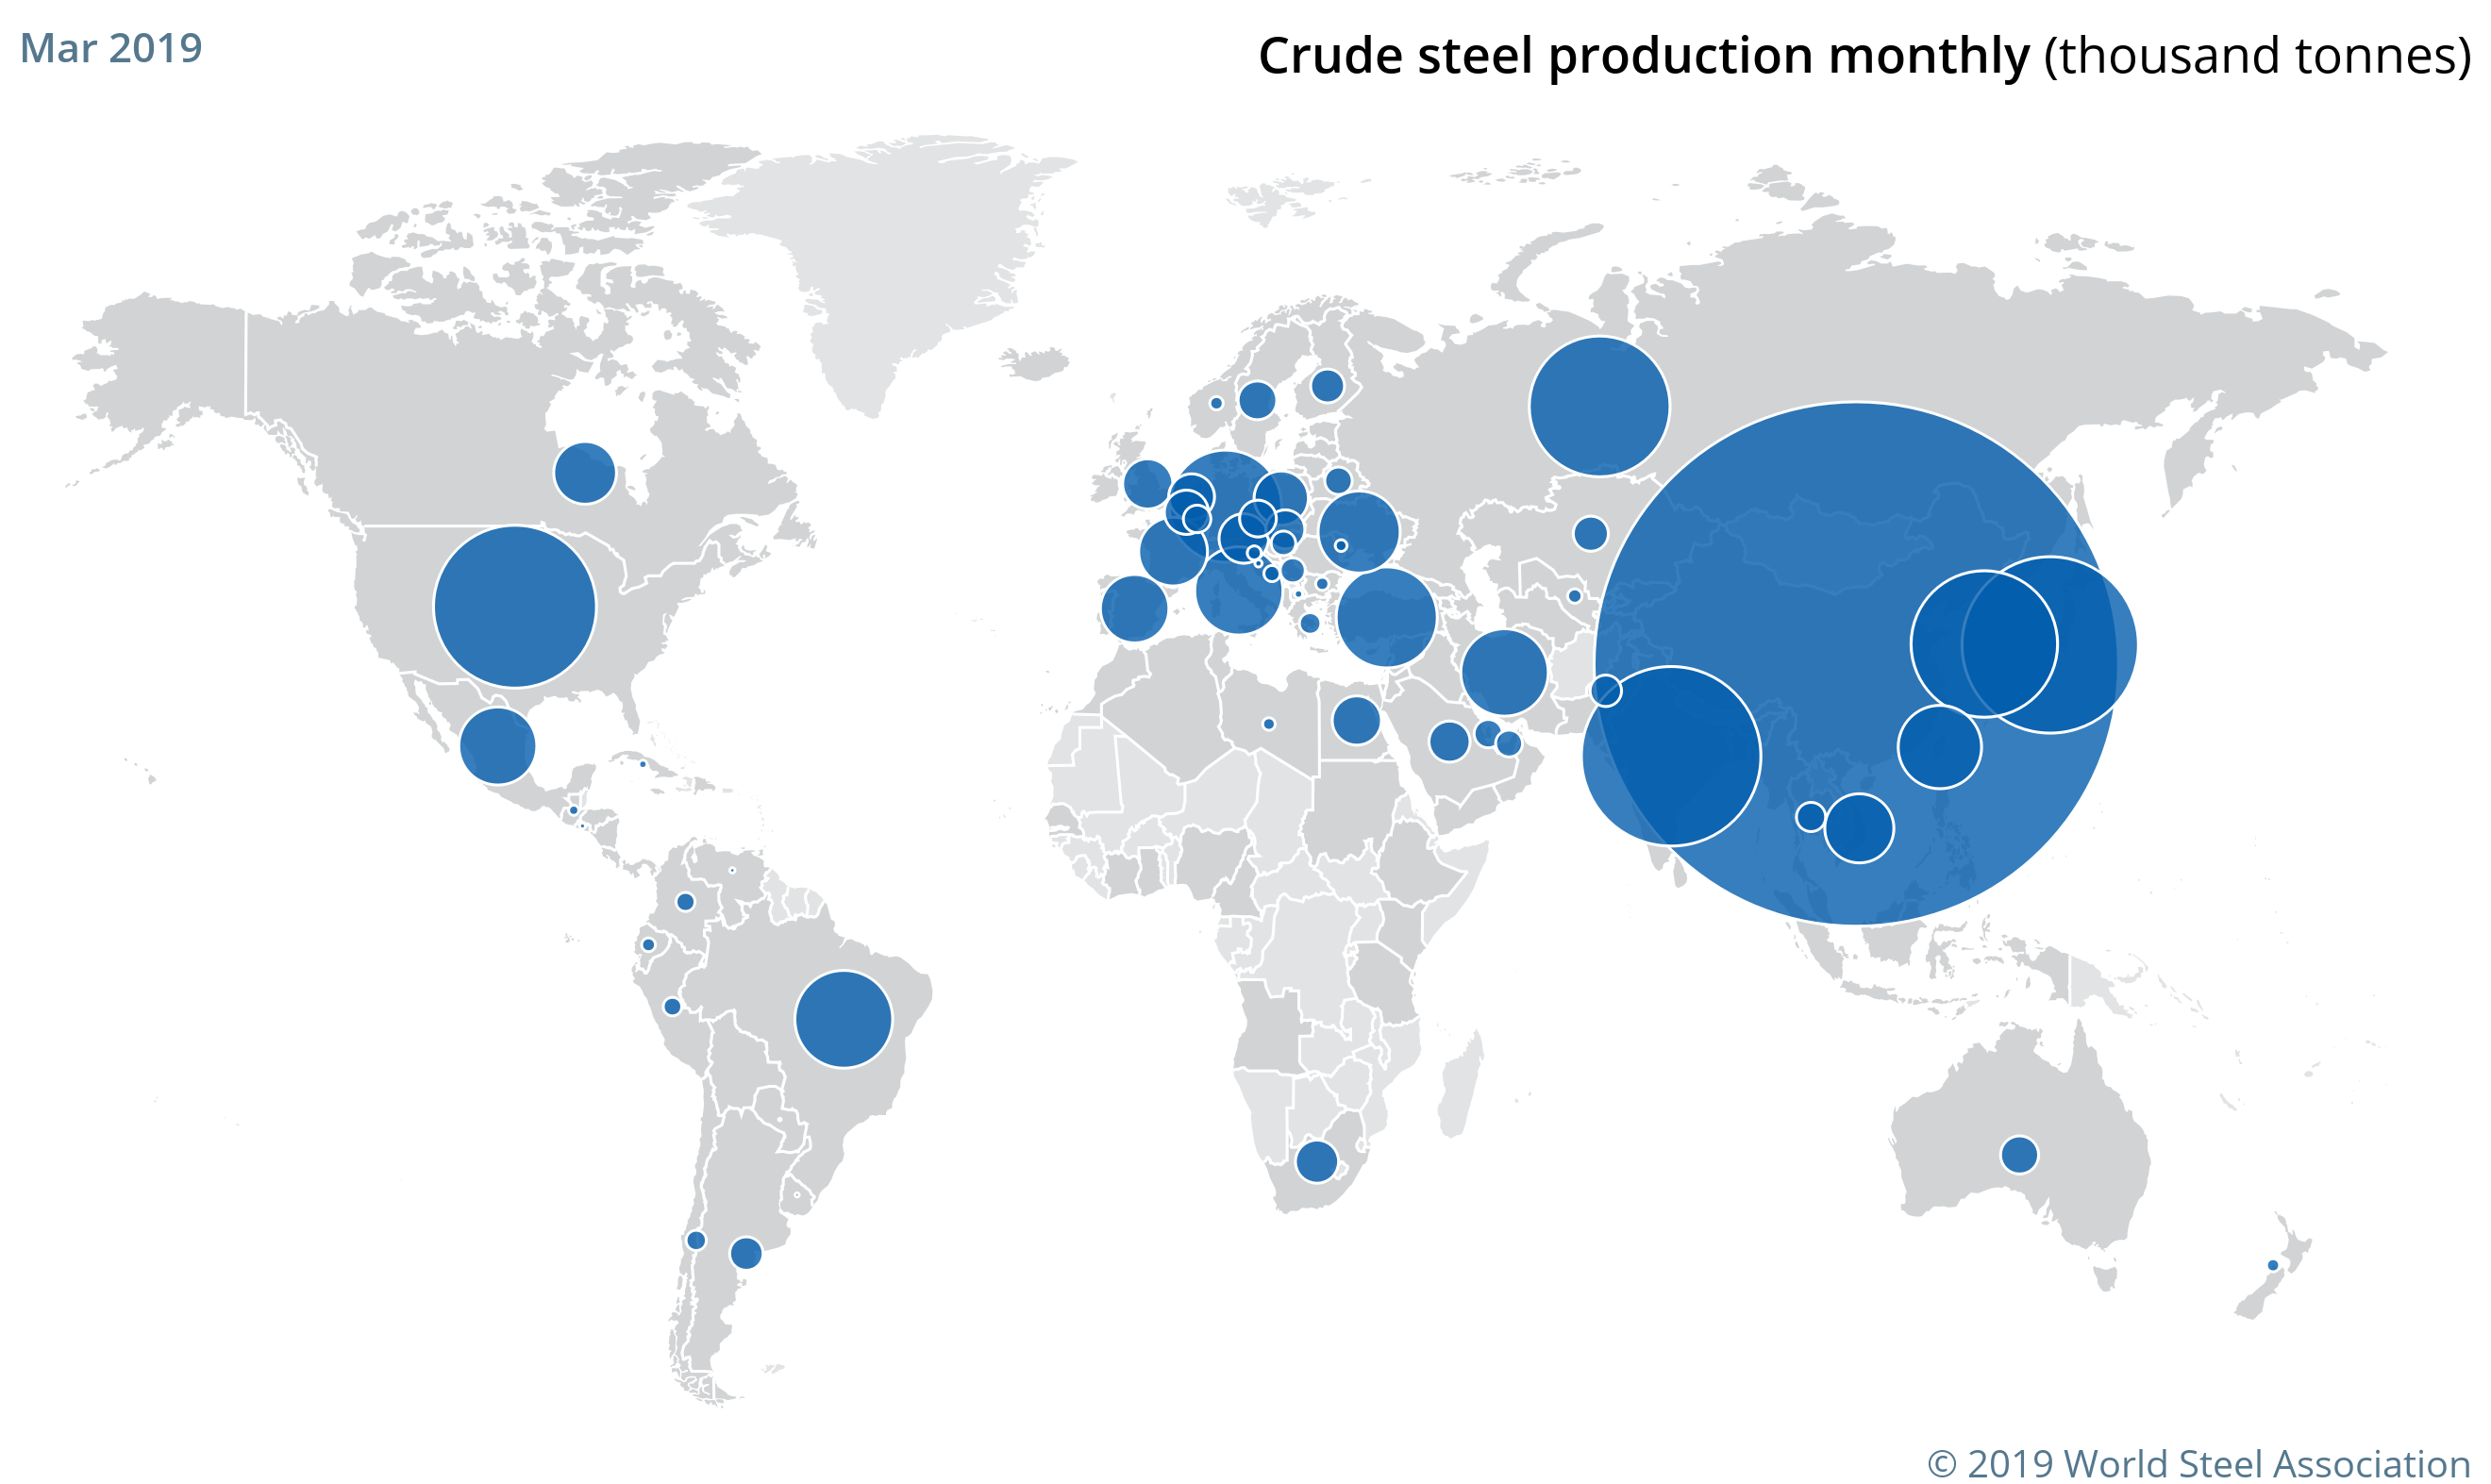 Monthly crude steel production for March 2019